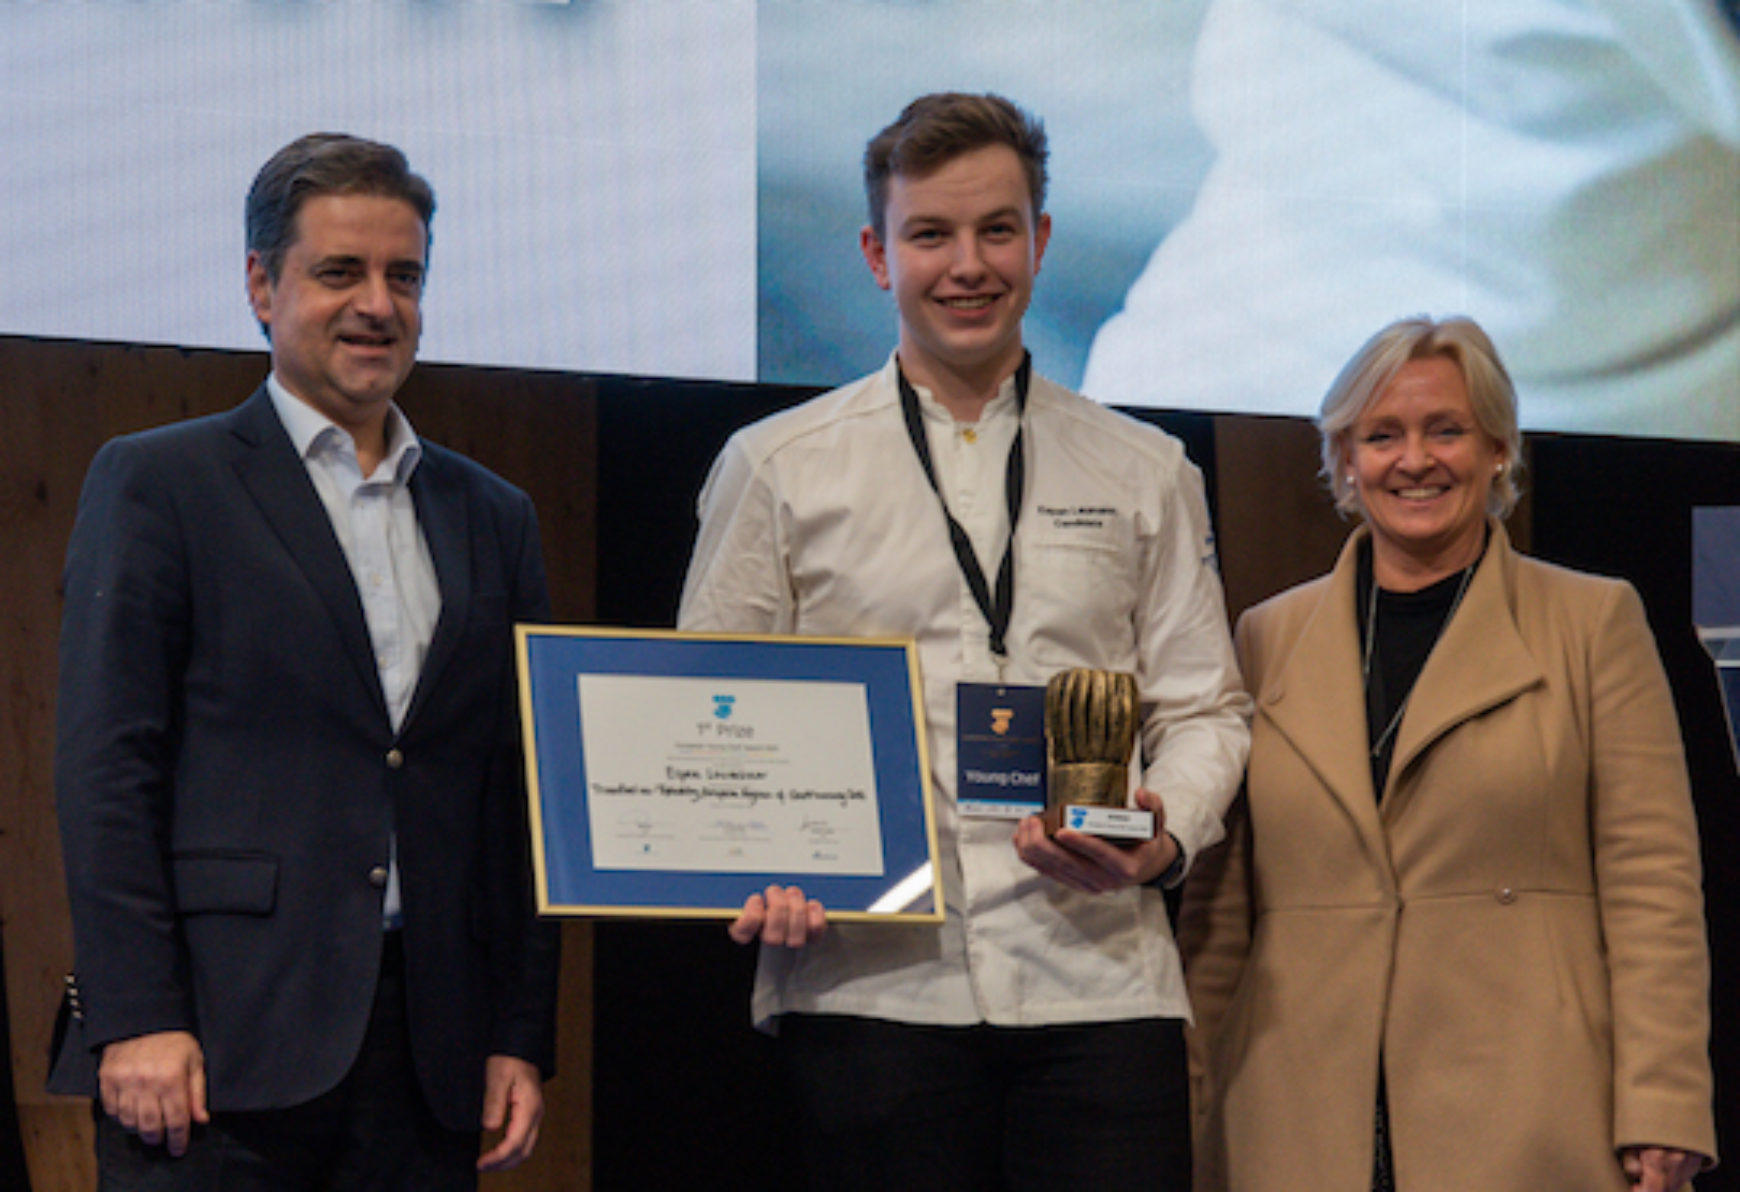 Winner of the European Young Chef Award 2021 announced!